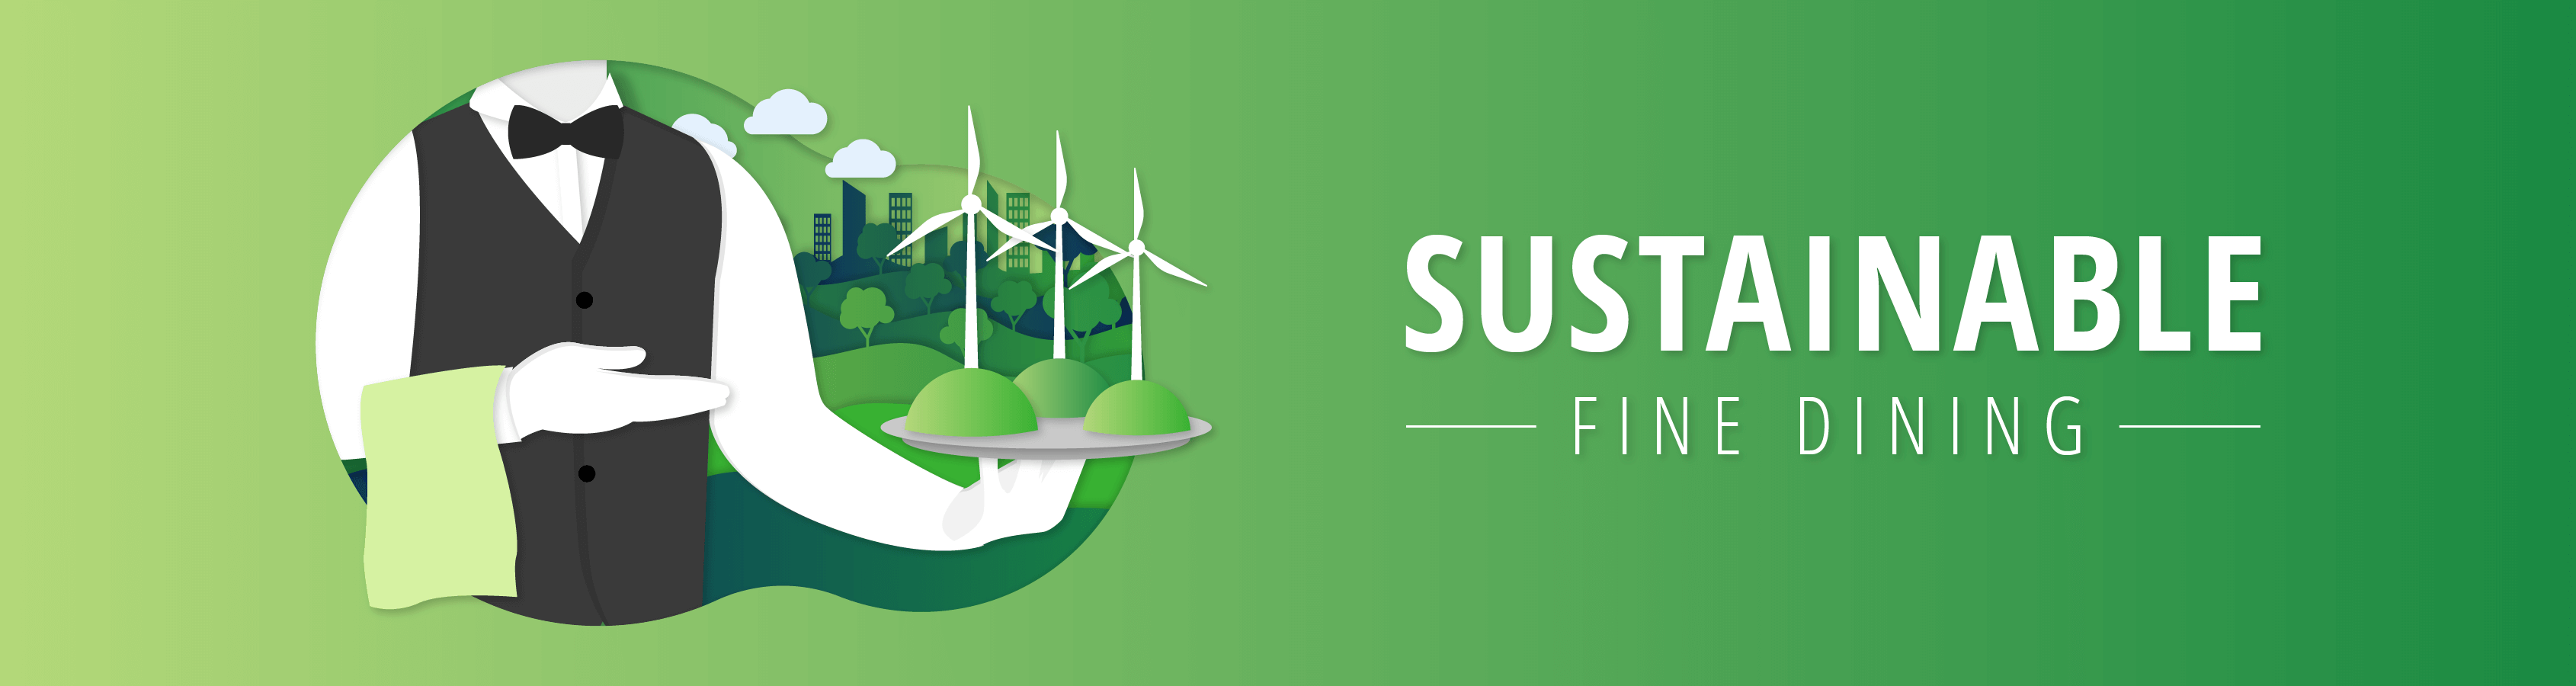 Sustainable Fine Dining header image